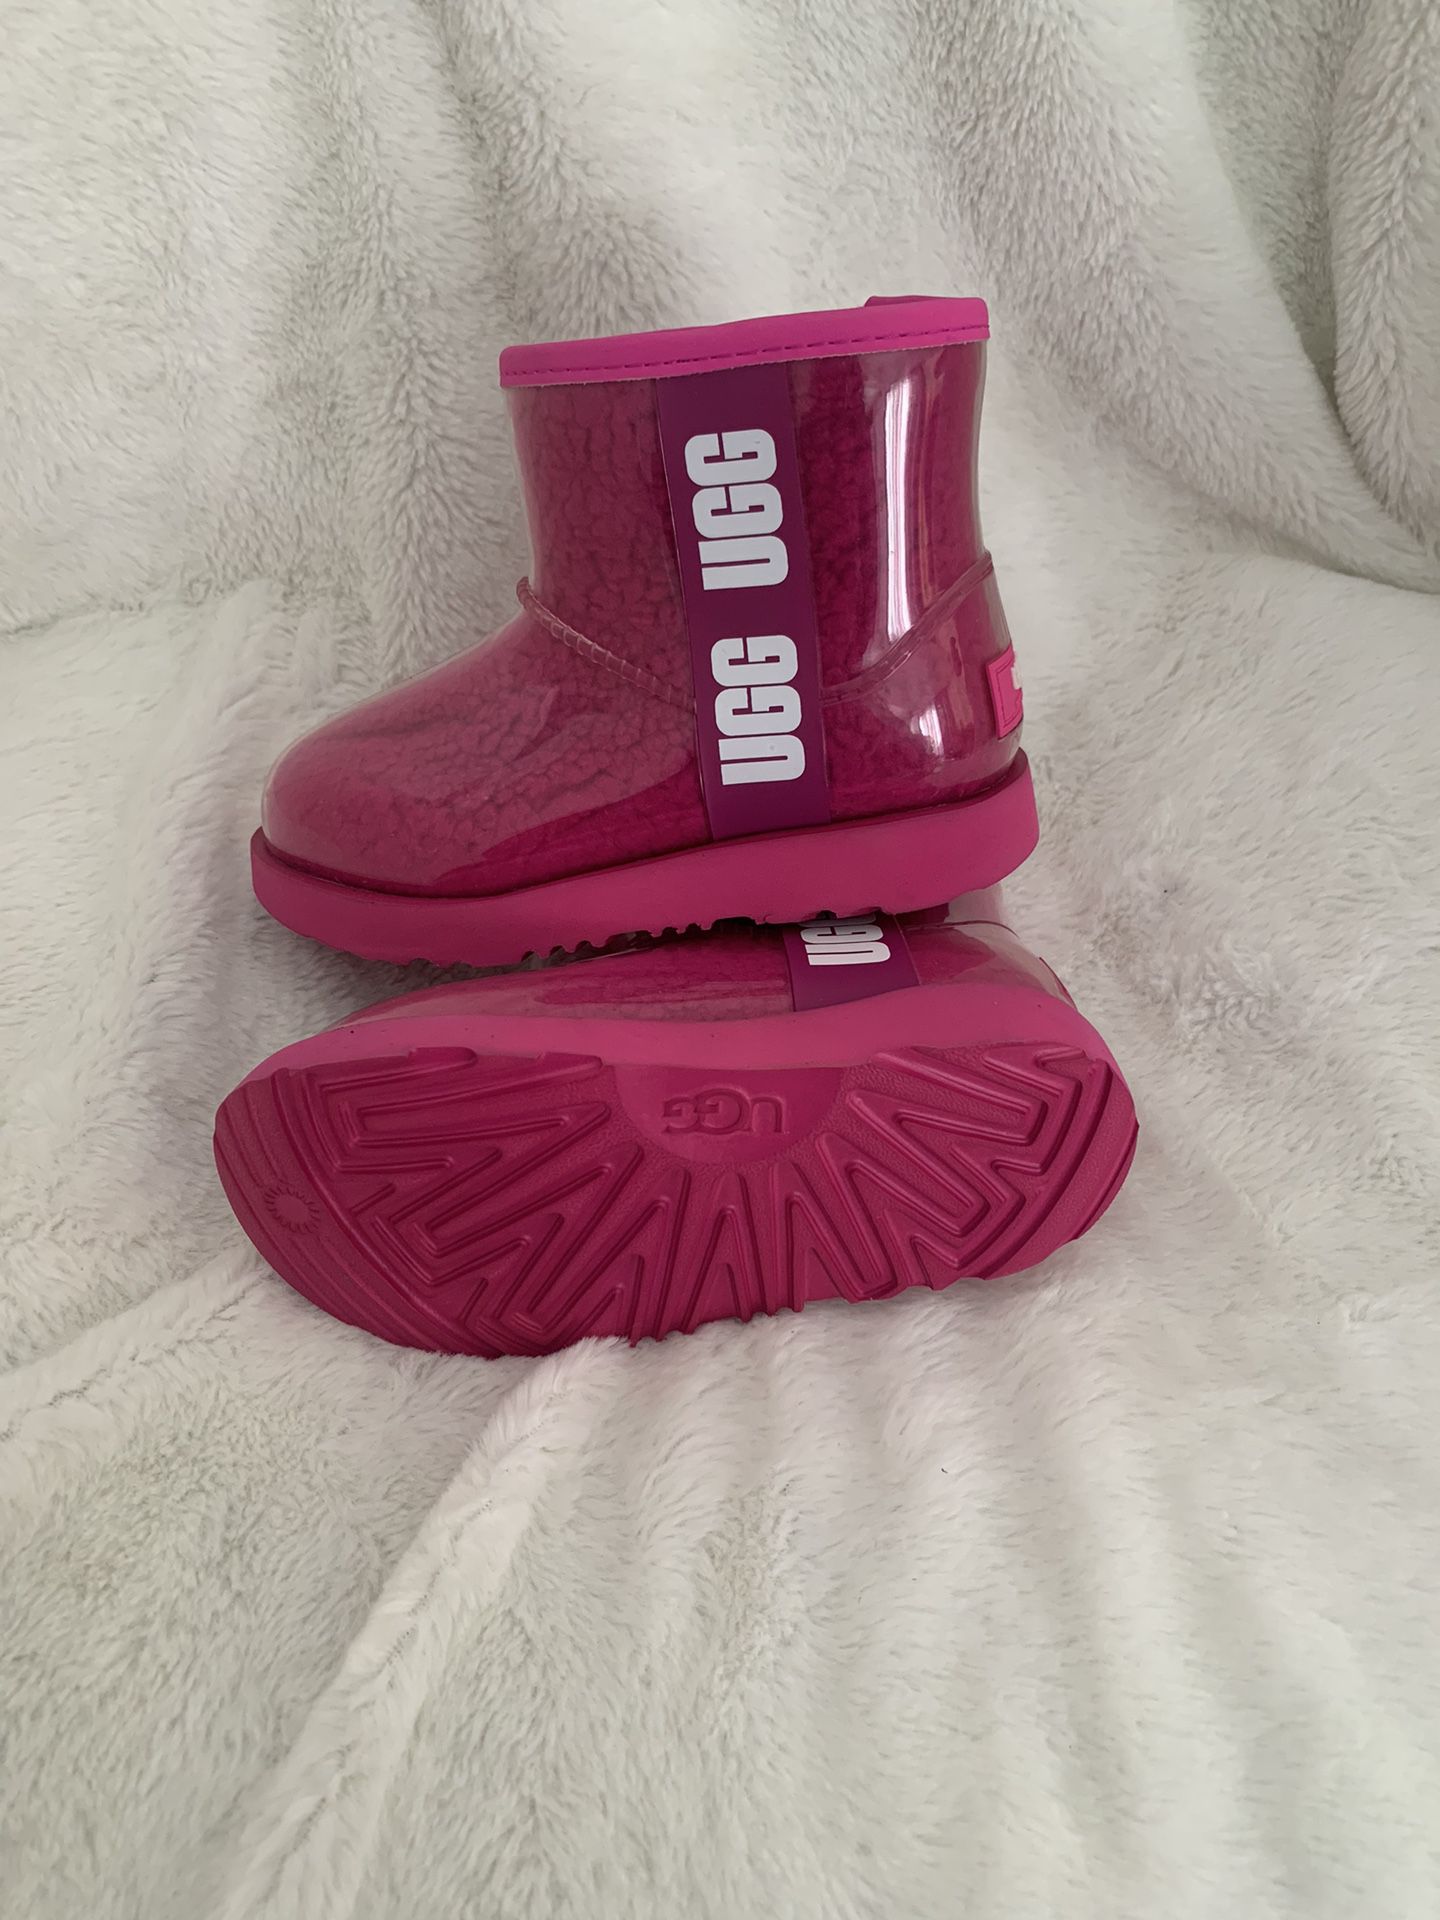 New Toddler UGG Rain Boots Size:11C